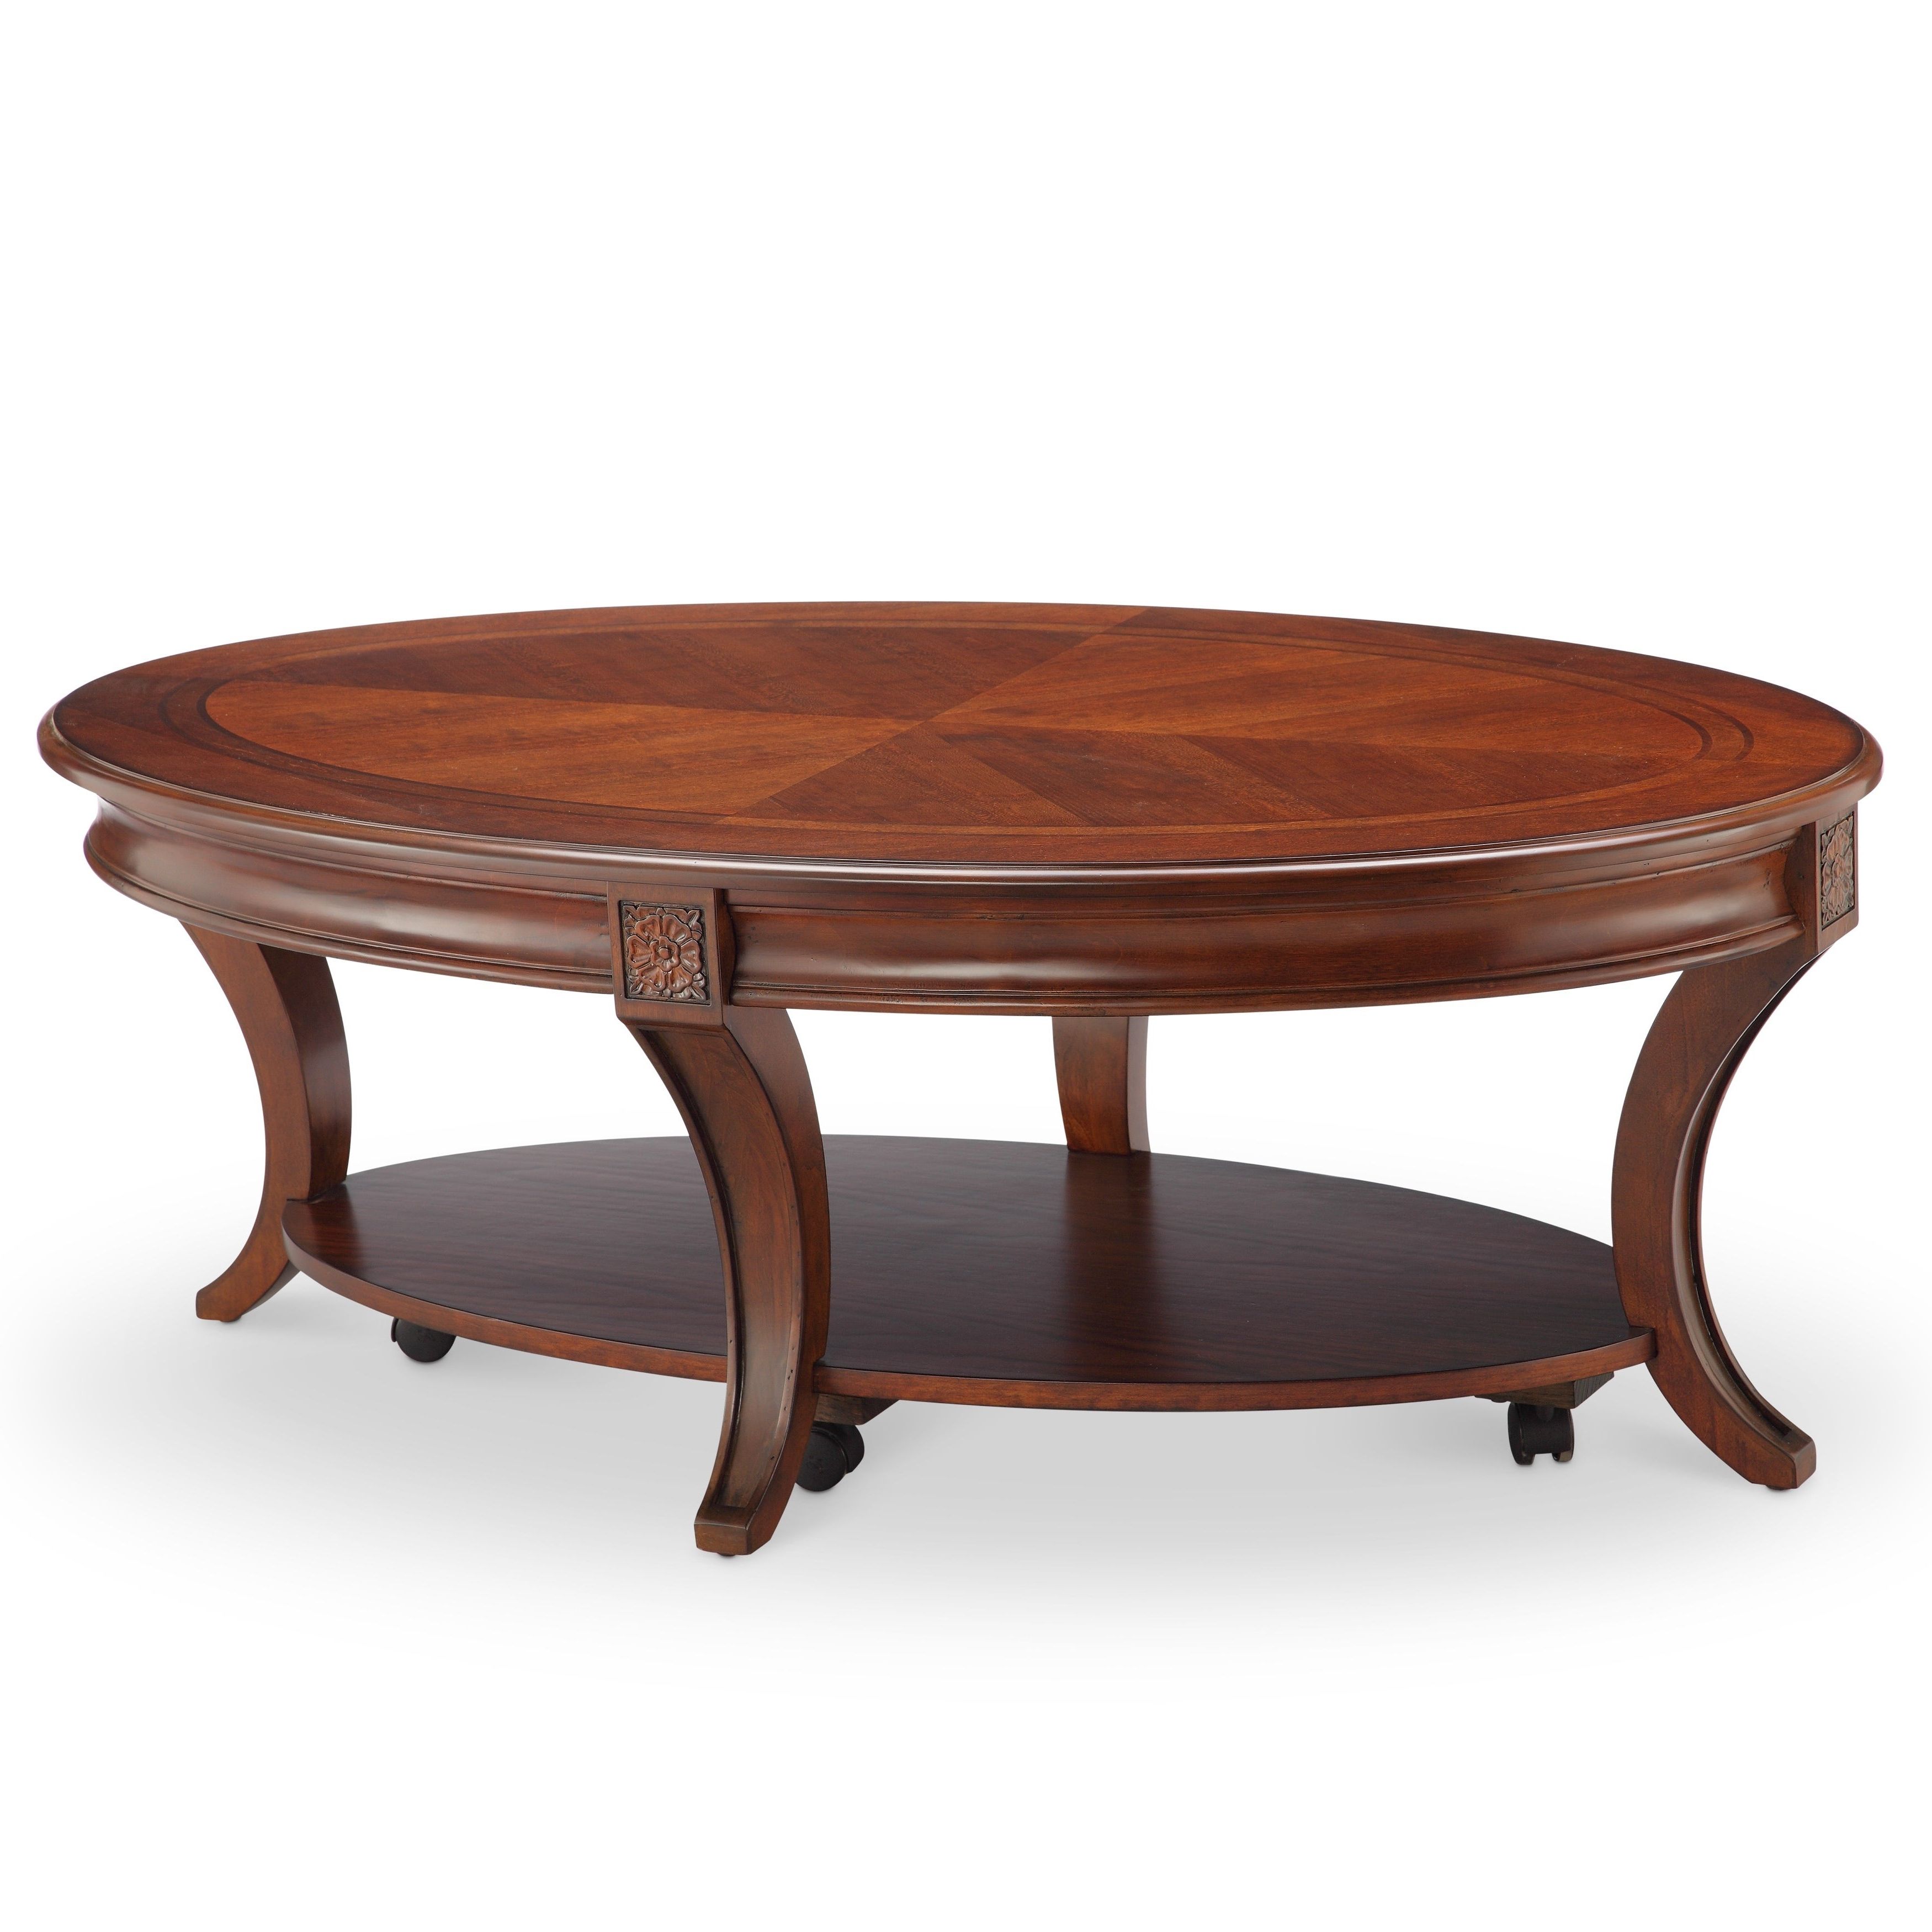 Featured Photo of Winslet Cherry Finish Wood Oval Coffee Tables With Casters